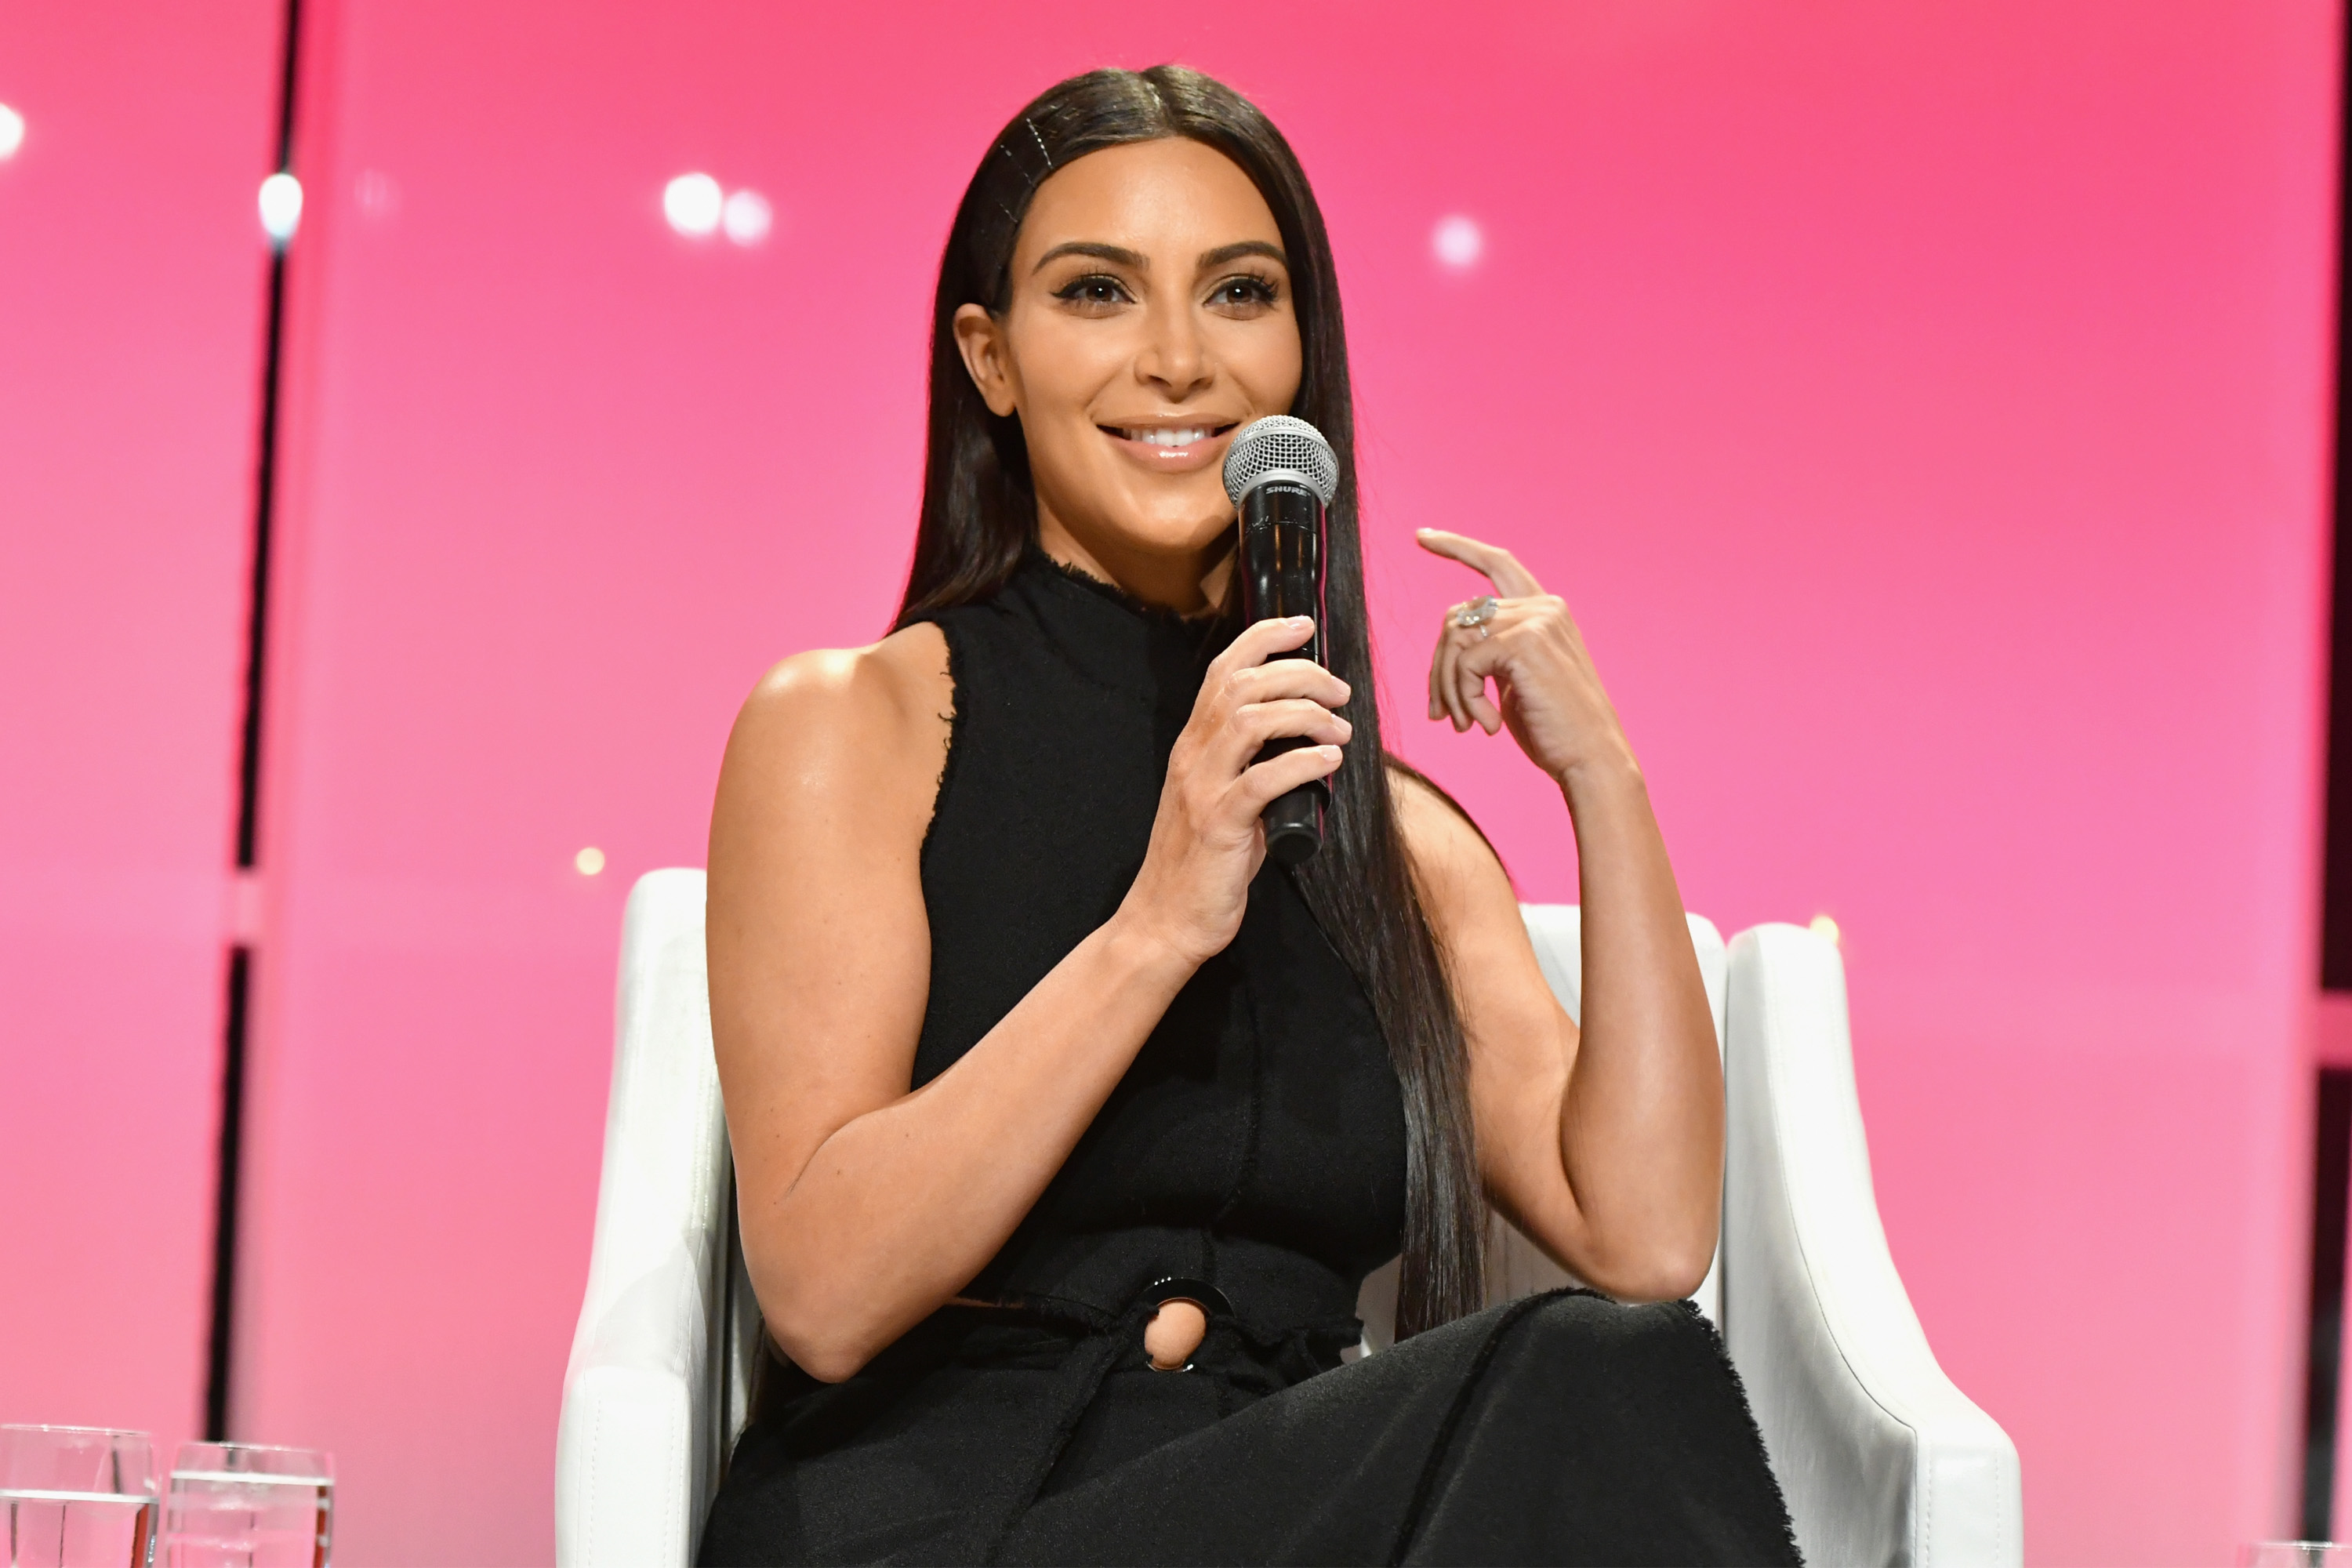 NEW YORK, NY - SEPTEMBER 27: (EXCLUSIVE ACCESS, SPECIAL RATES APPLY)  Kim Kardashian-West speaks at The Girls' Lounge dinner, giving visibility to women at Advertising Week 2016, at Pier 60 on September 27, 2016 in New York City.  (Photo by Slaven Vlasic/Getty Images for The Girls' Lounge) (Slaven Vlasic&mdash;The Girls' Lounge/Getty Images)